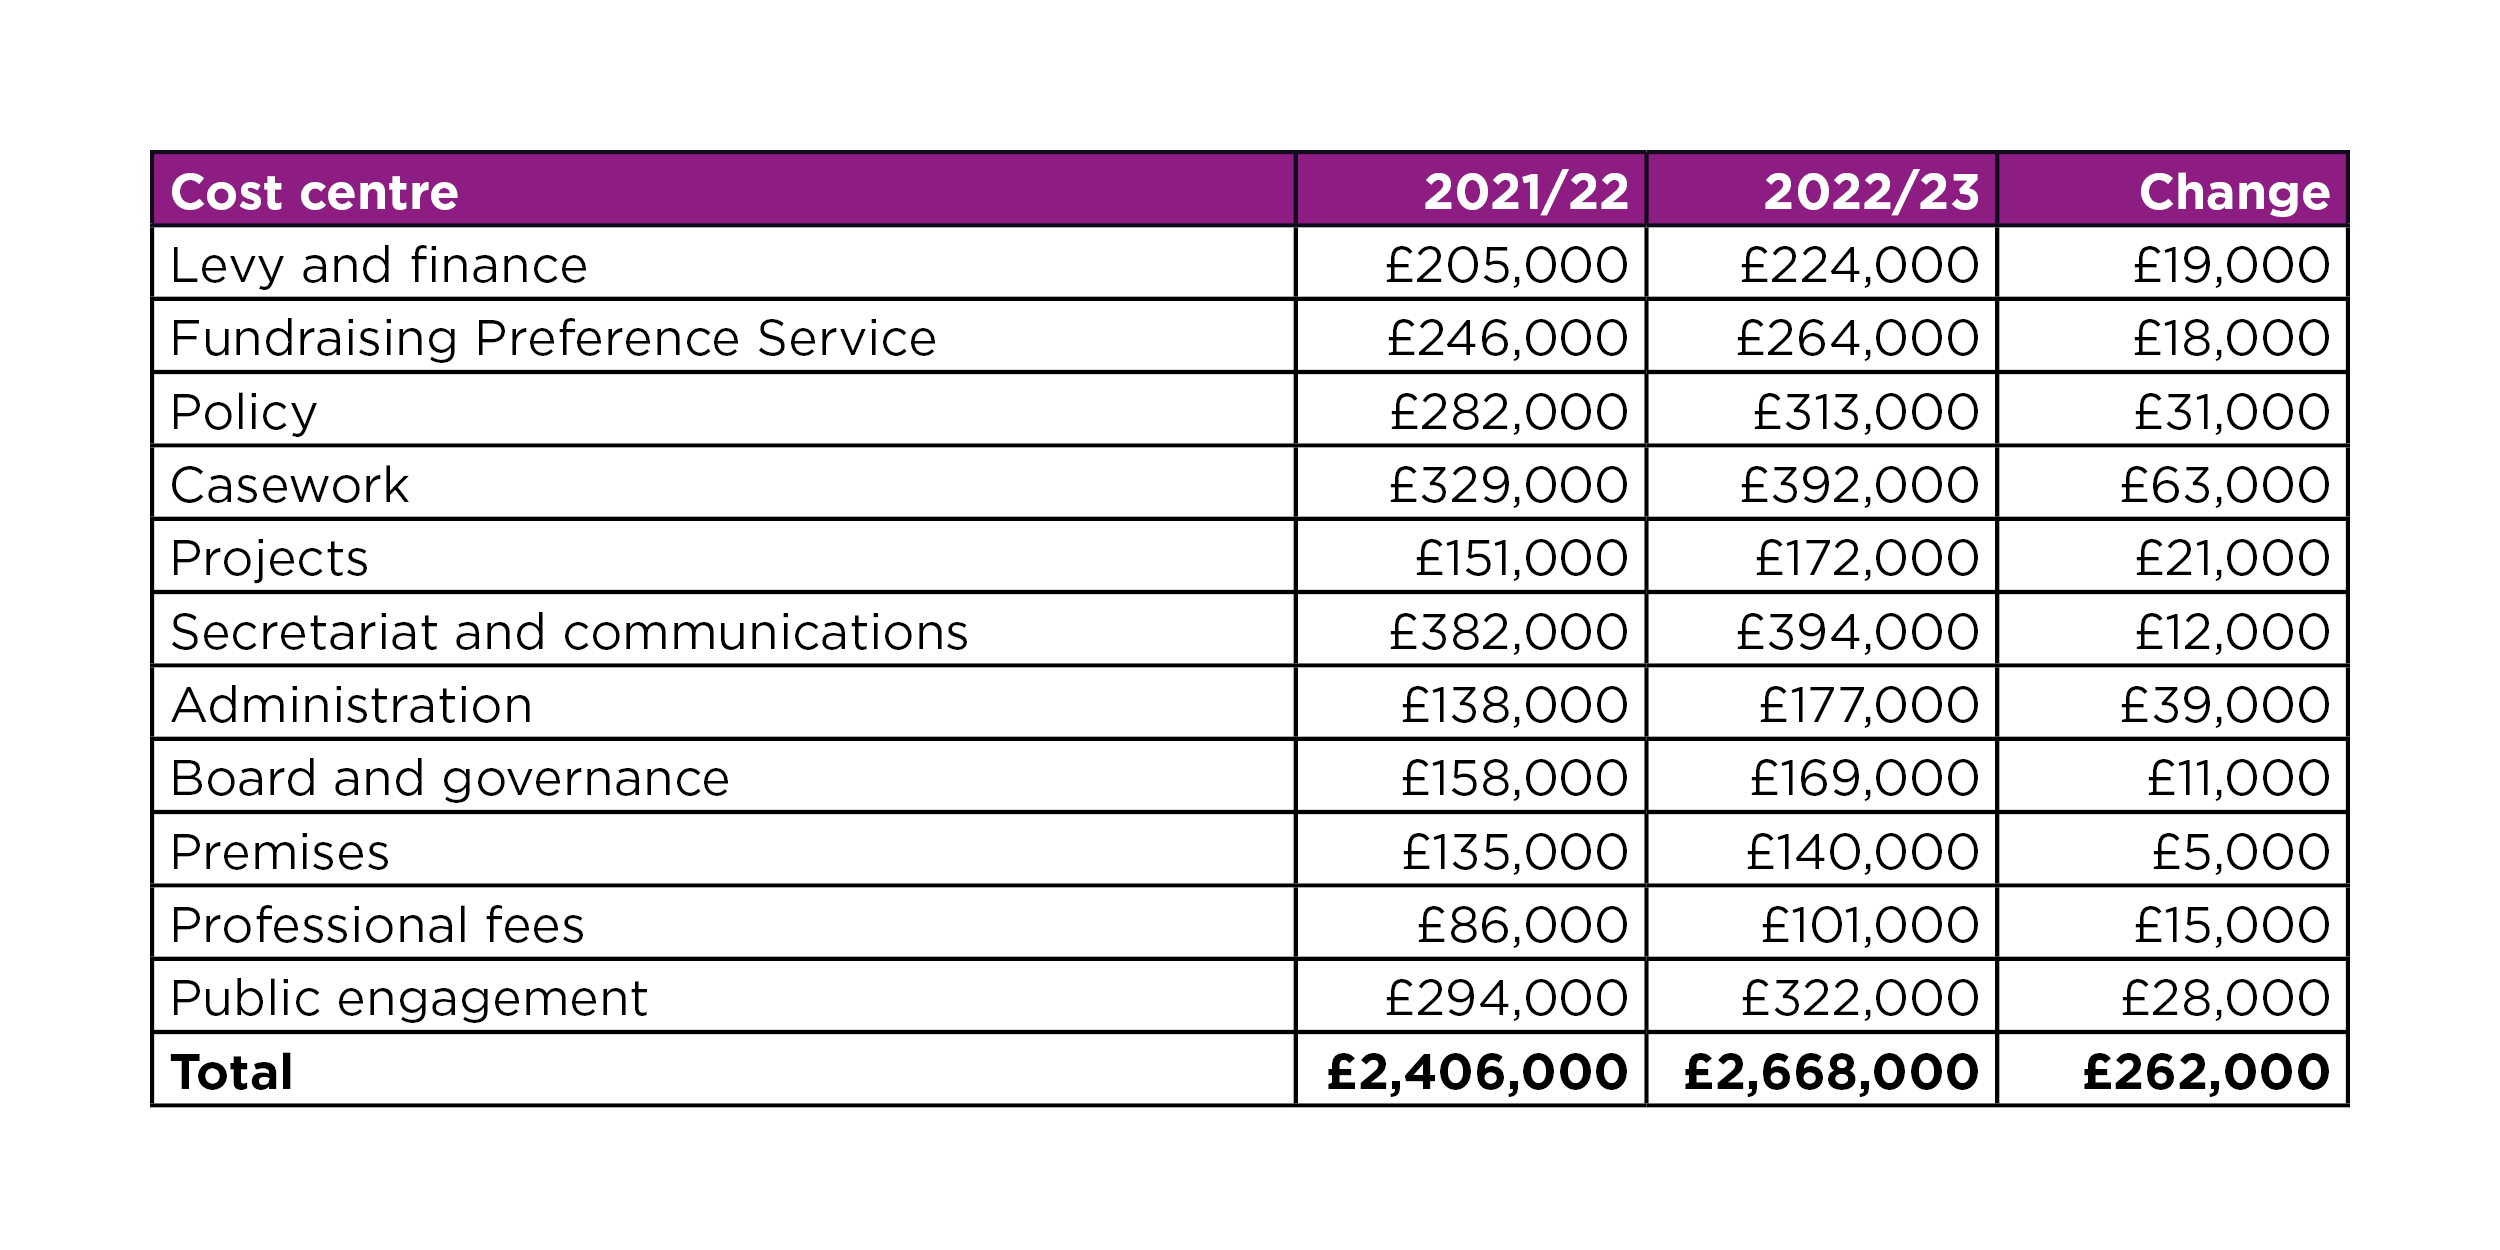 Table showing budget summary by cost centre for 2022/23